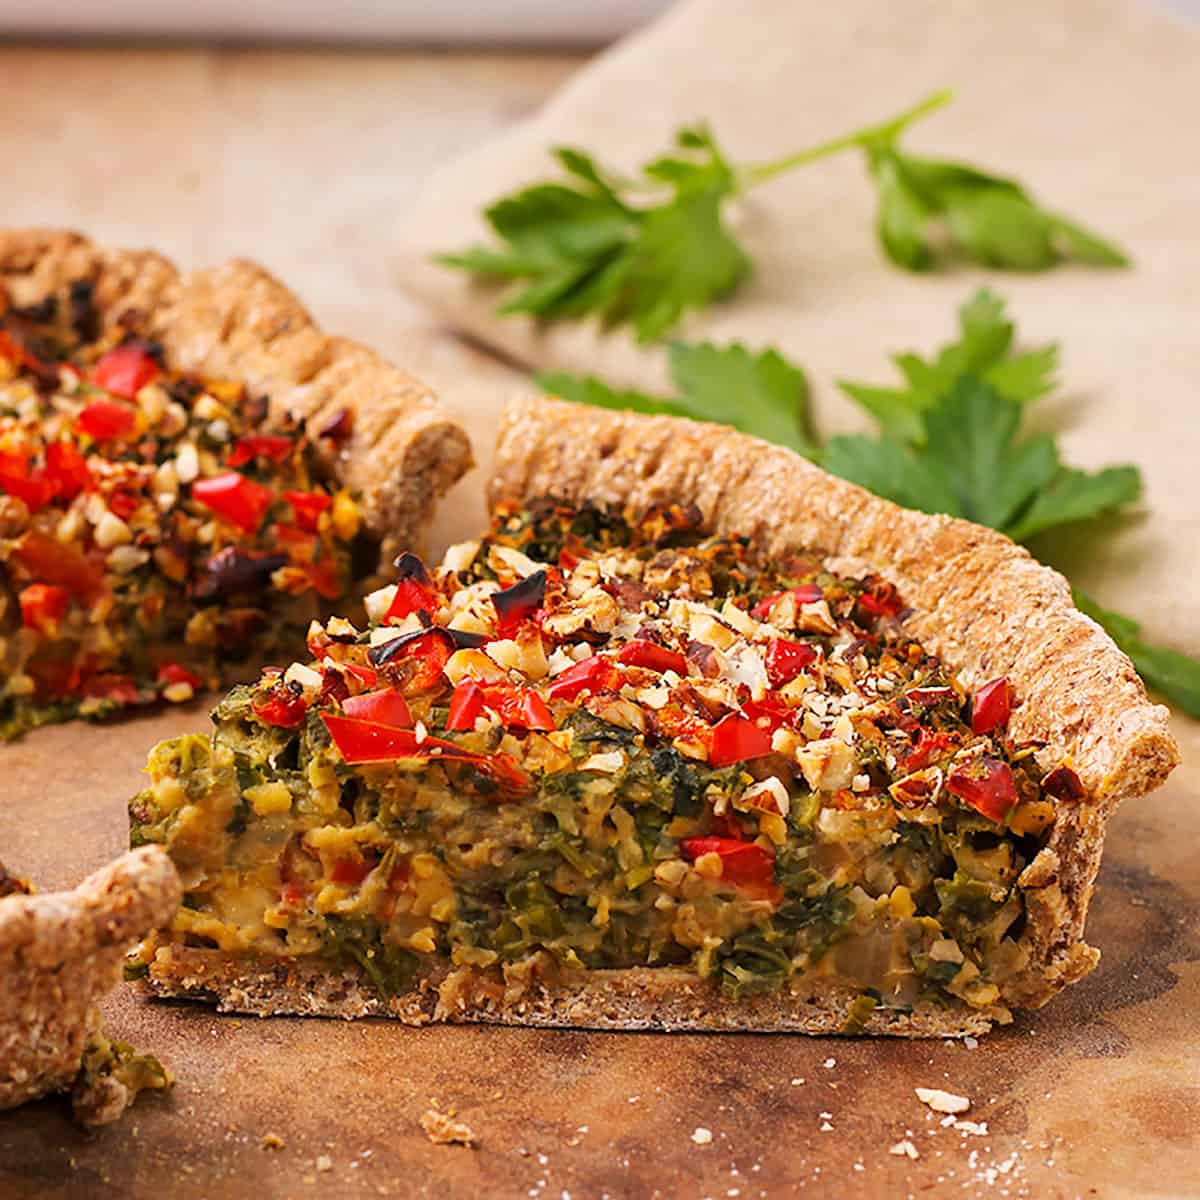 A piece of mushroom & kale quiche with diced red peppers and hazelnuts.